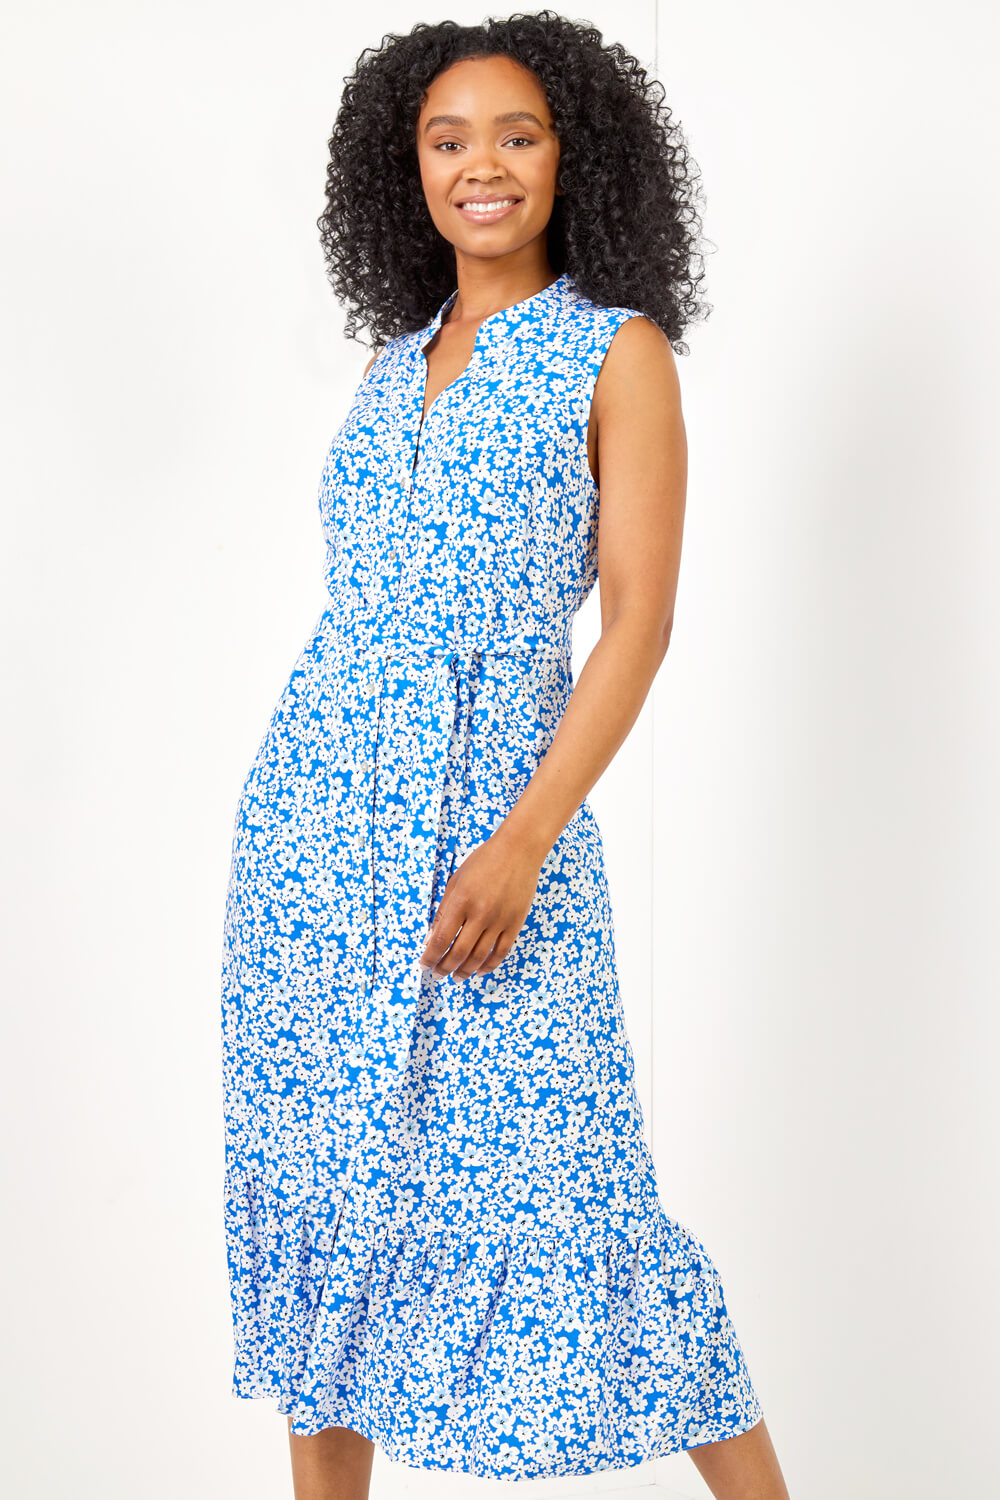 Blue Petite Ditsy Floral Print Frill Tiered Dress, Image 4 of 5